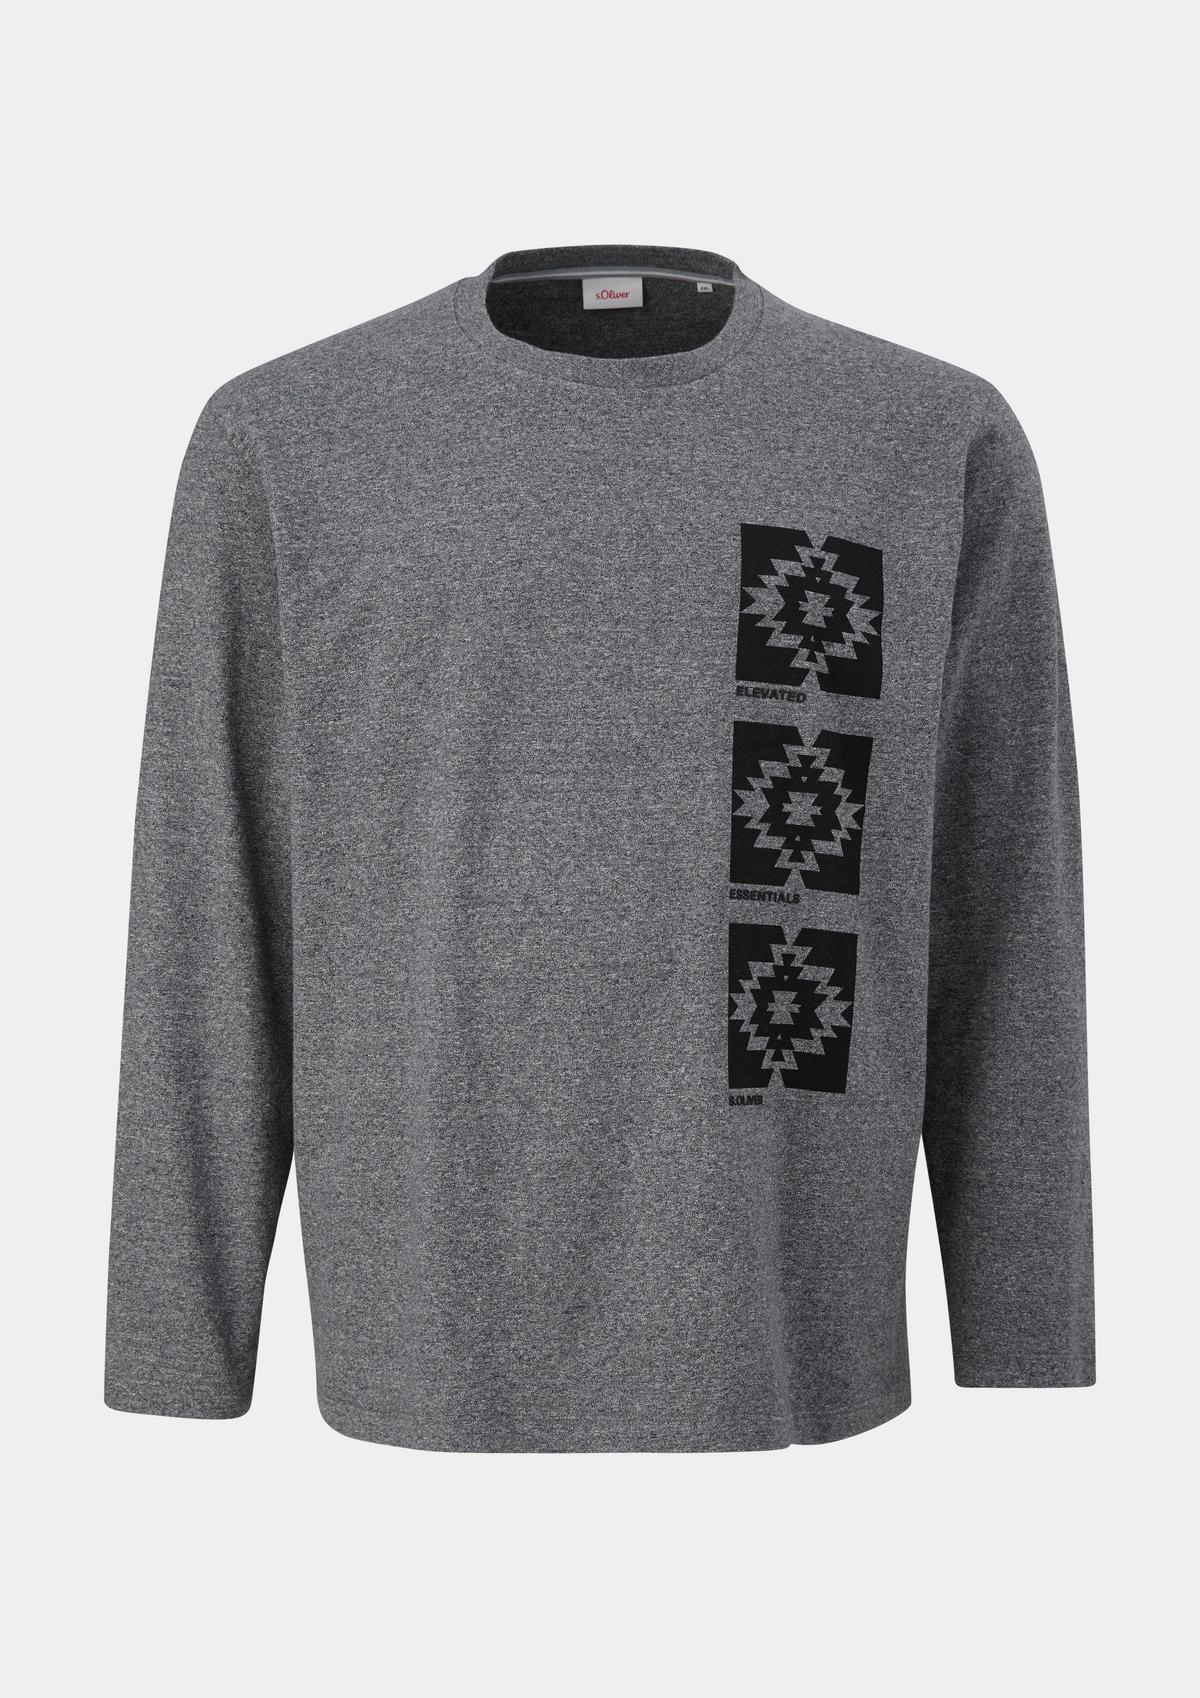 s.Oliver Long sleeve top with a rubberised graphic print